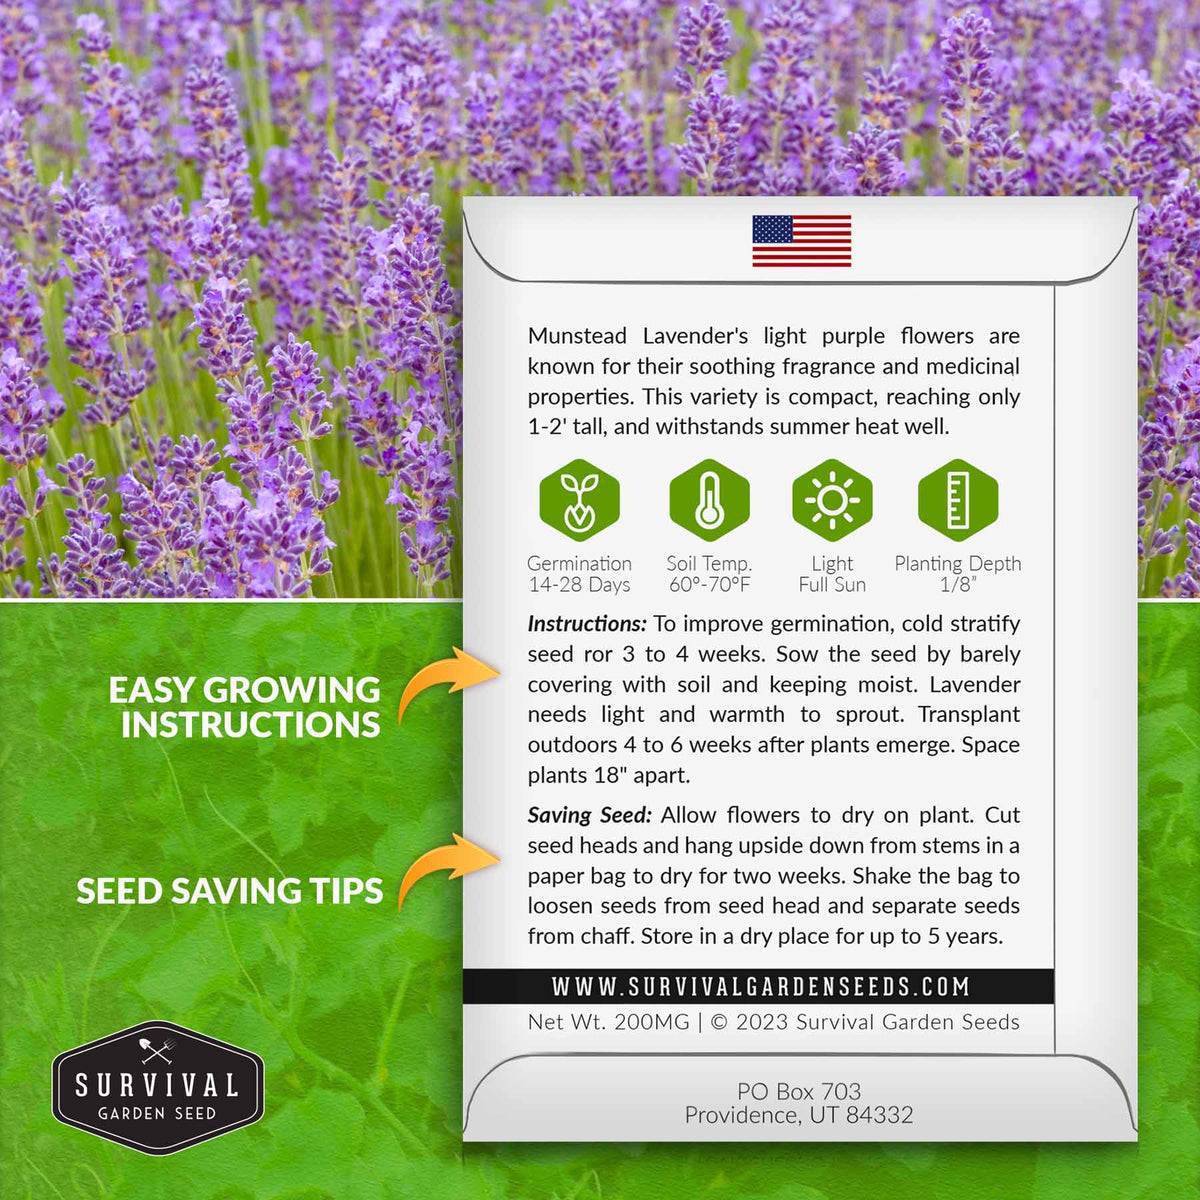 Munstead Lavender seed growing instructions